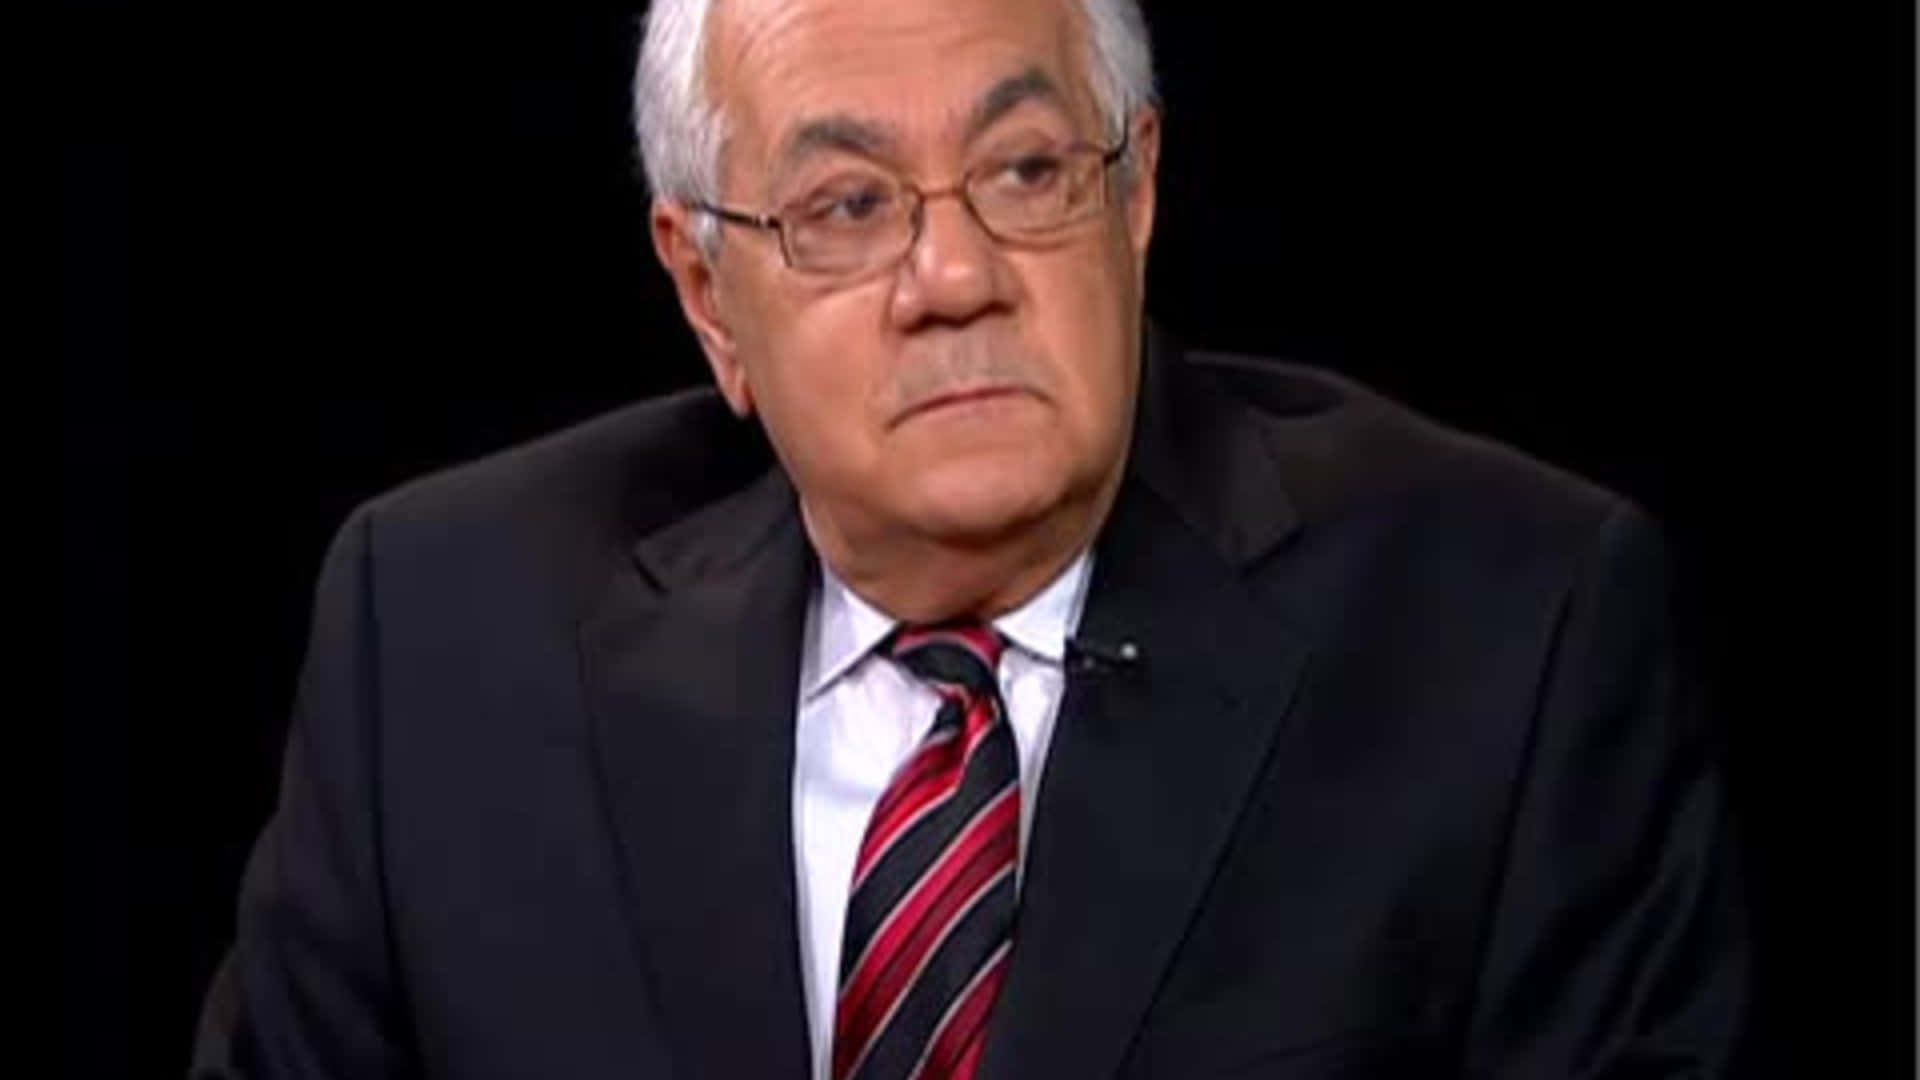 Barney Frank with a Stern Expression Wallpaper